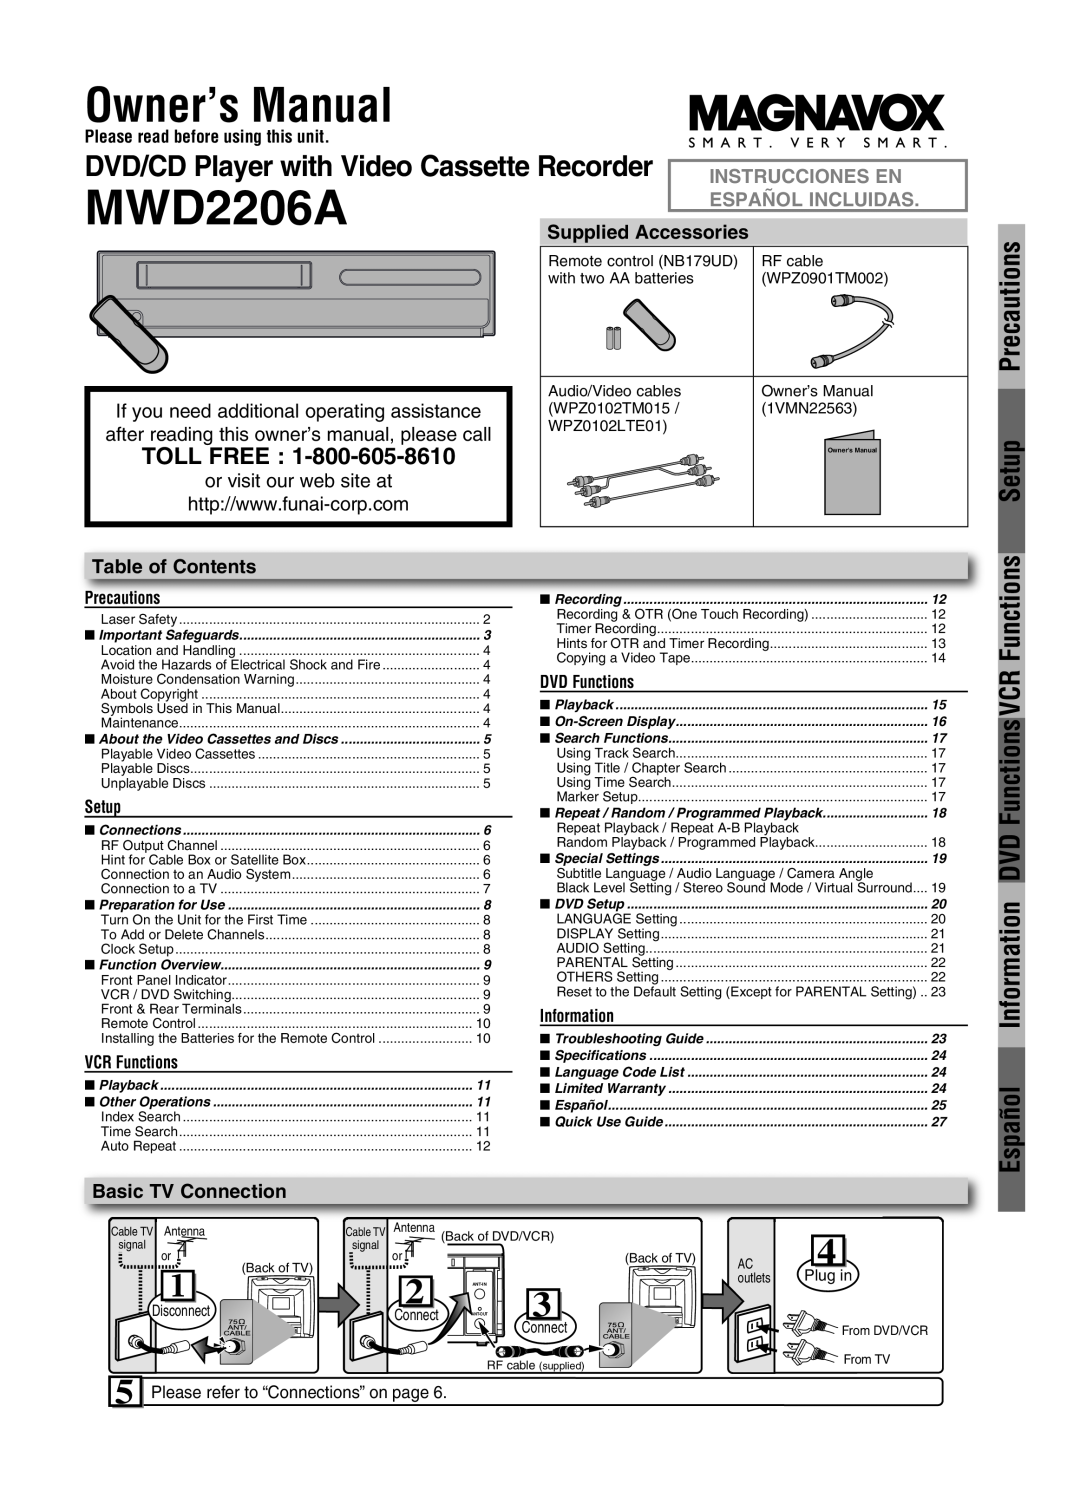 Magnavox MWD2206A owner manual Owner’s Manual, Precautions, Setup, Español Information DVD Functions VCR Functions 